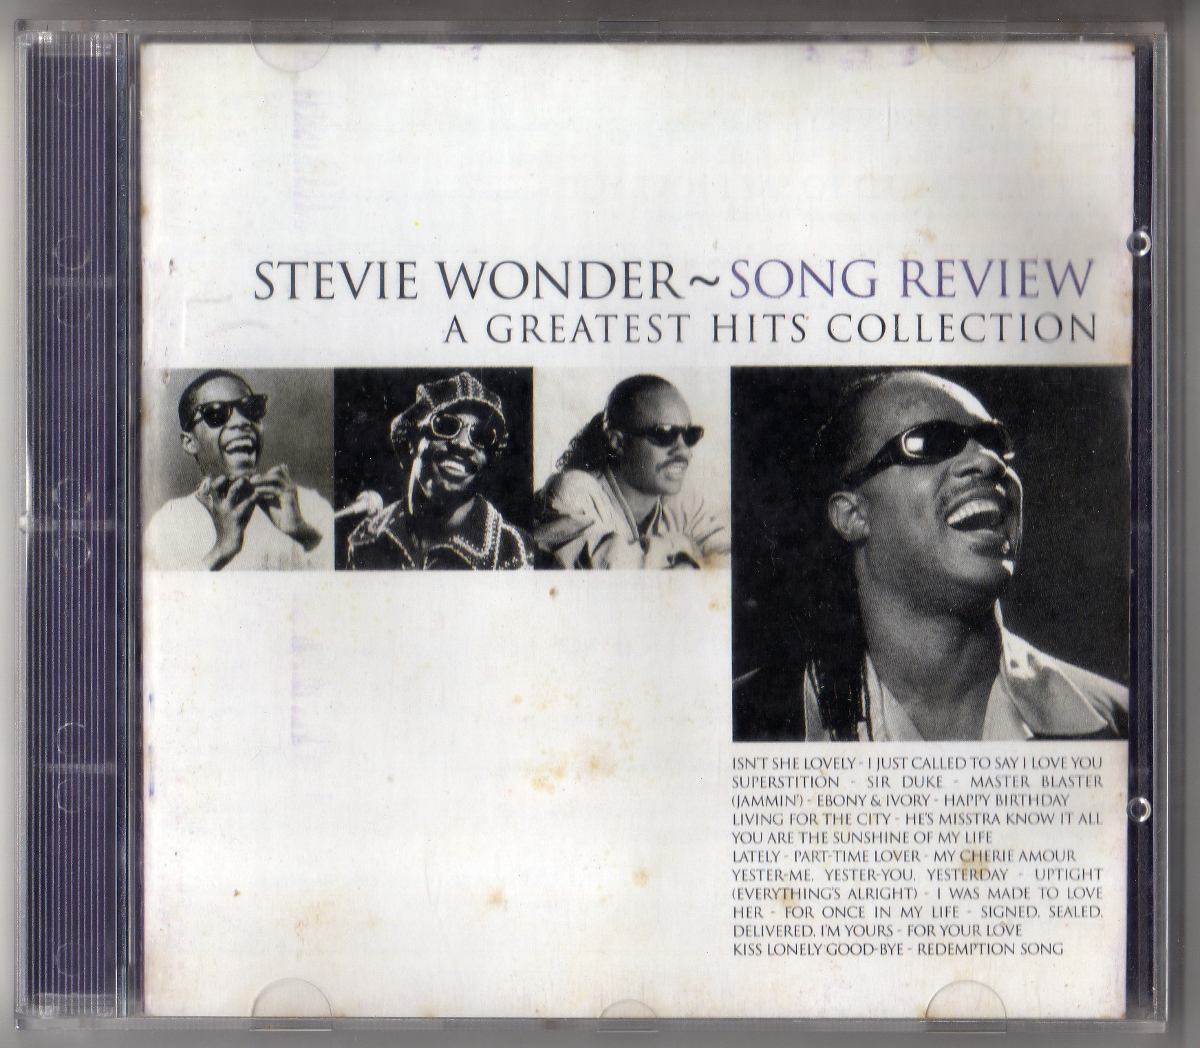 Cd Stevie Wonder - Song Review - A Greatest Hits Collection - R$ 32,00.